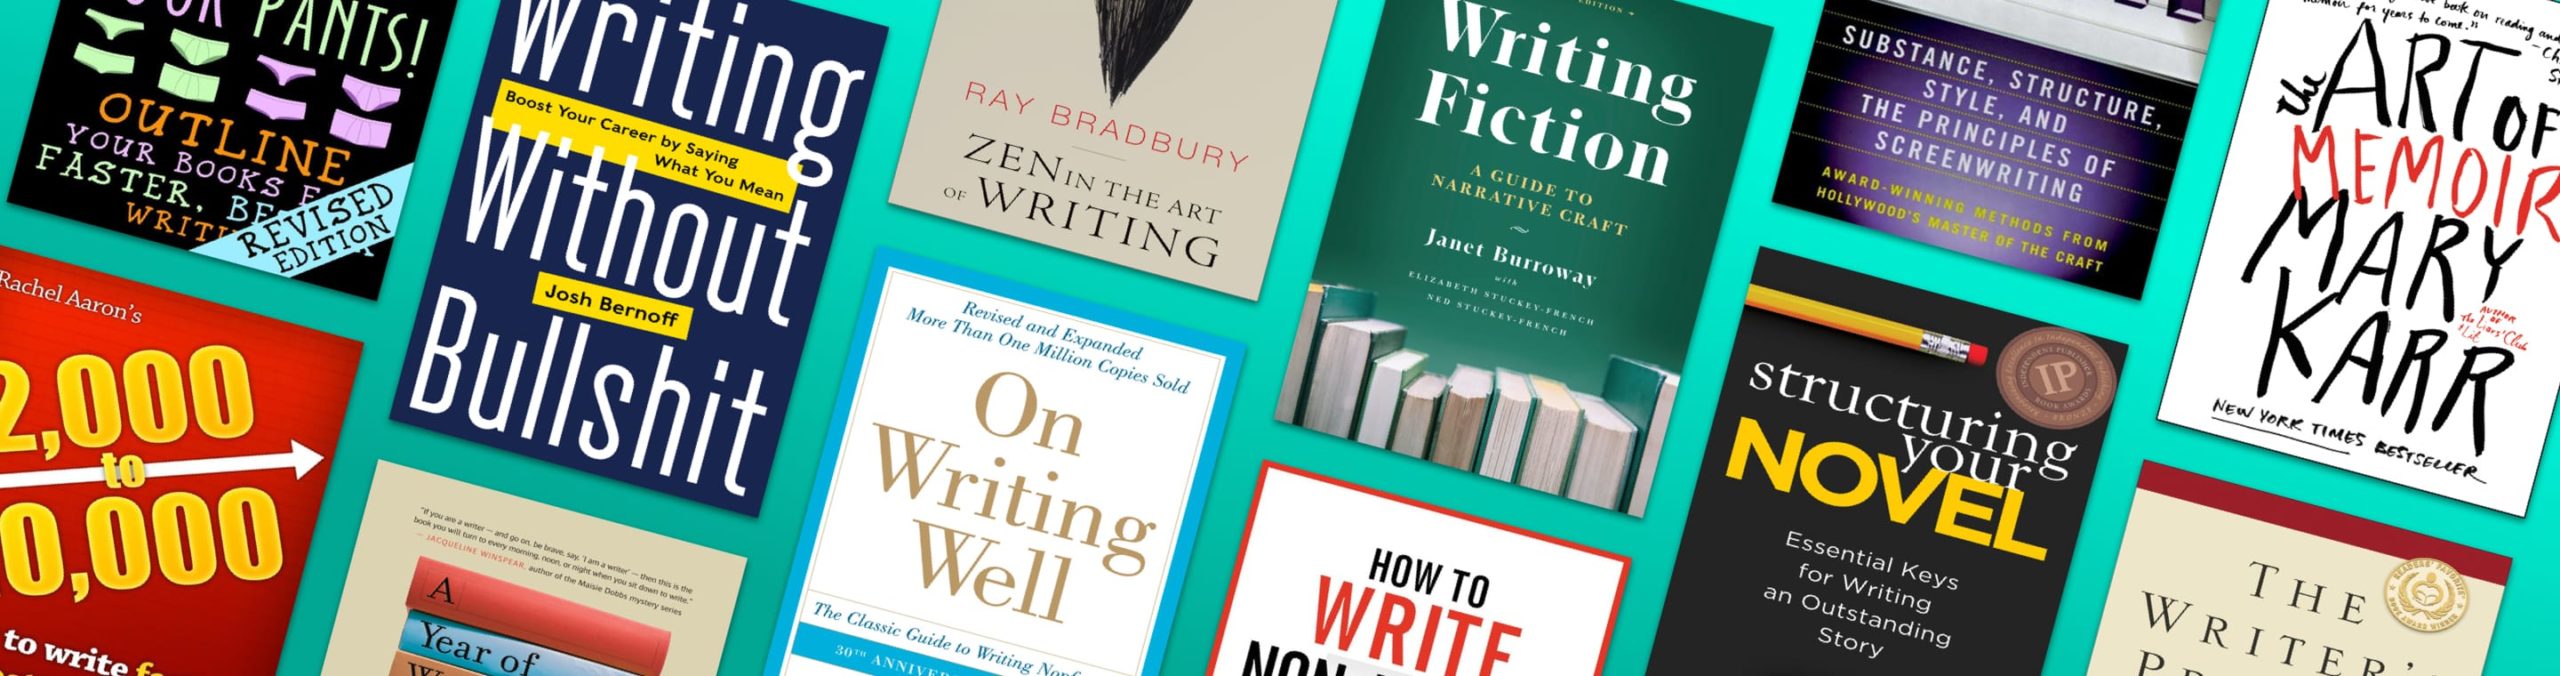 15 of the best writing books to hone your craft